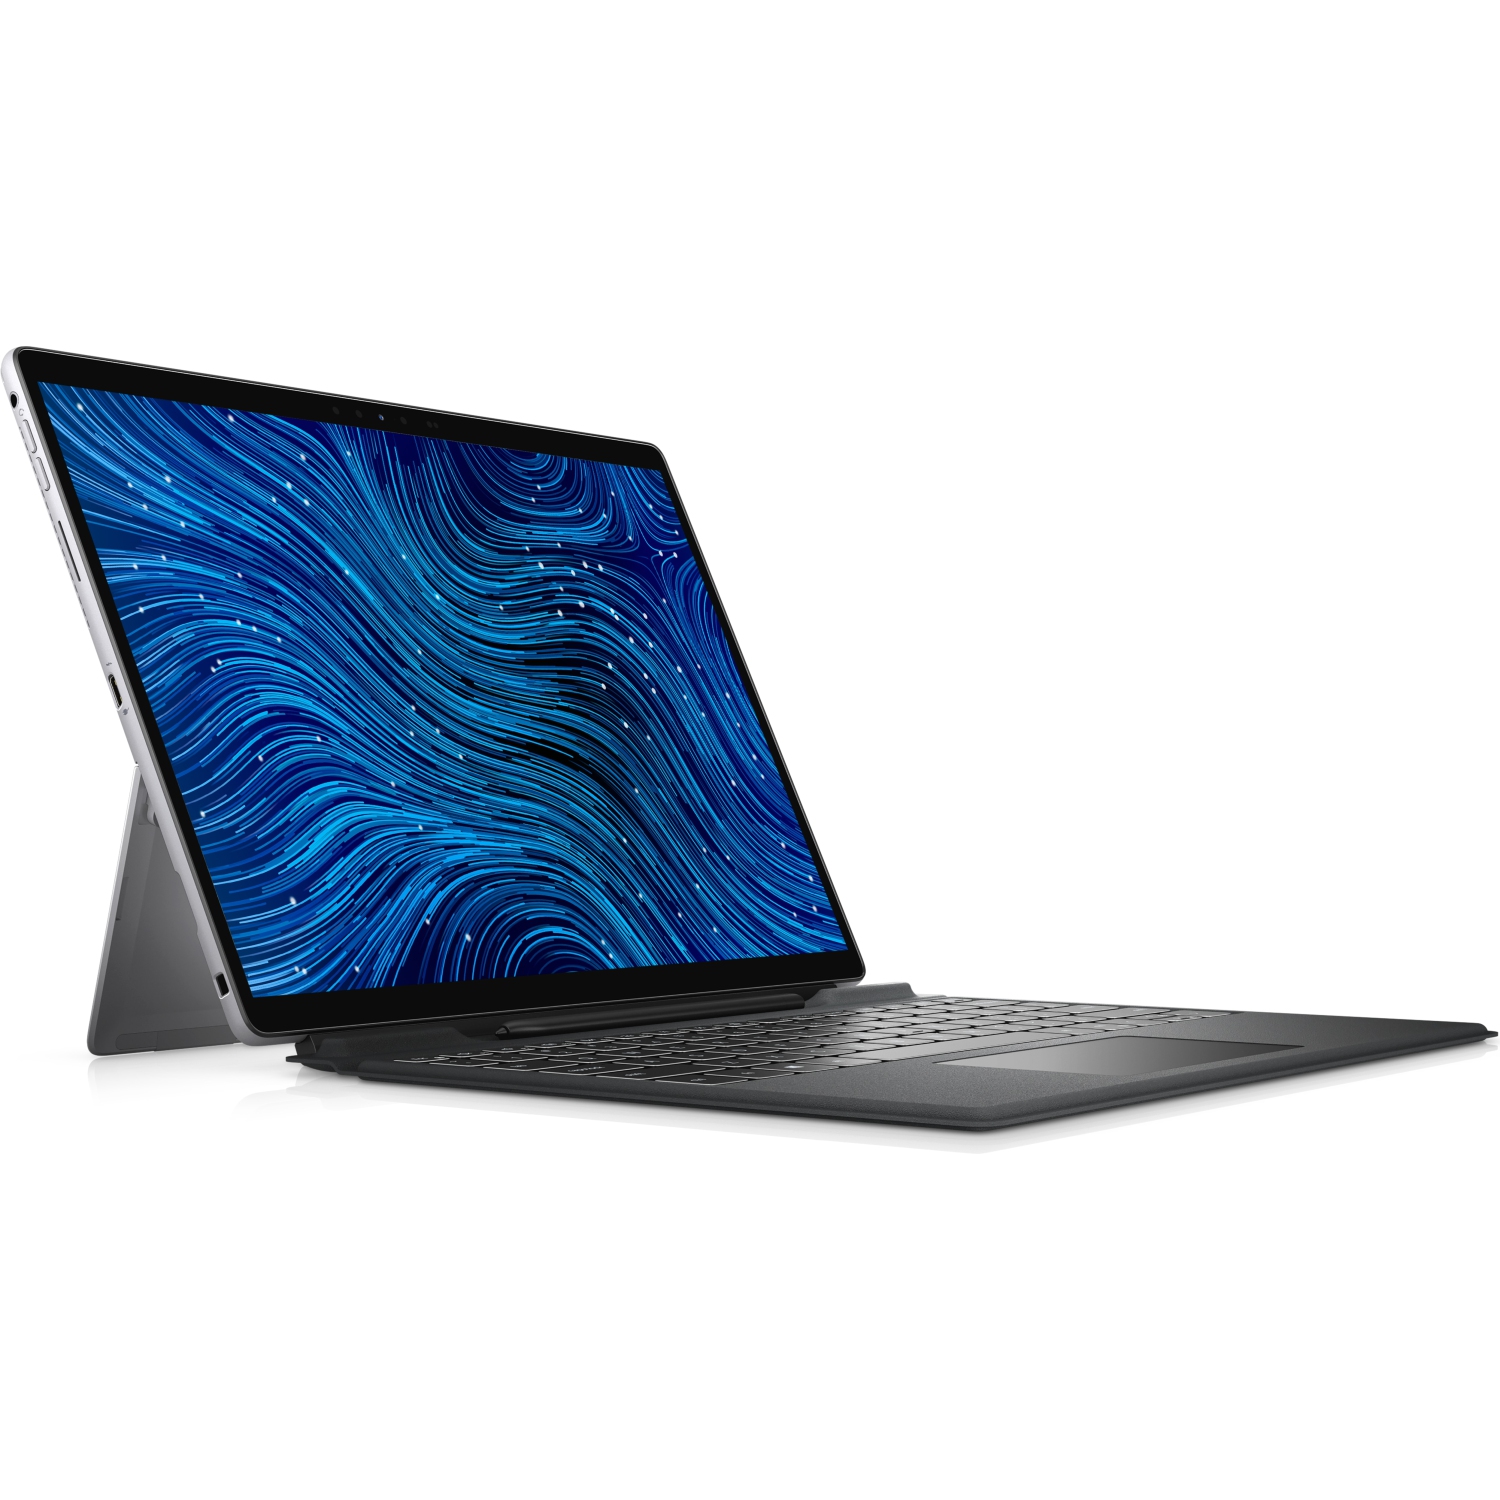 Refurbished (Excellent) - Dell Latitude 7000 7320 Detachable 13 2-in-1 (2021), 13" FHD+ Touch, Core i5, 1TB SSD, 16GB RAM, 4 Cores @ 4.2 GHz, 11th Gen CPU Certified